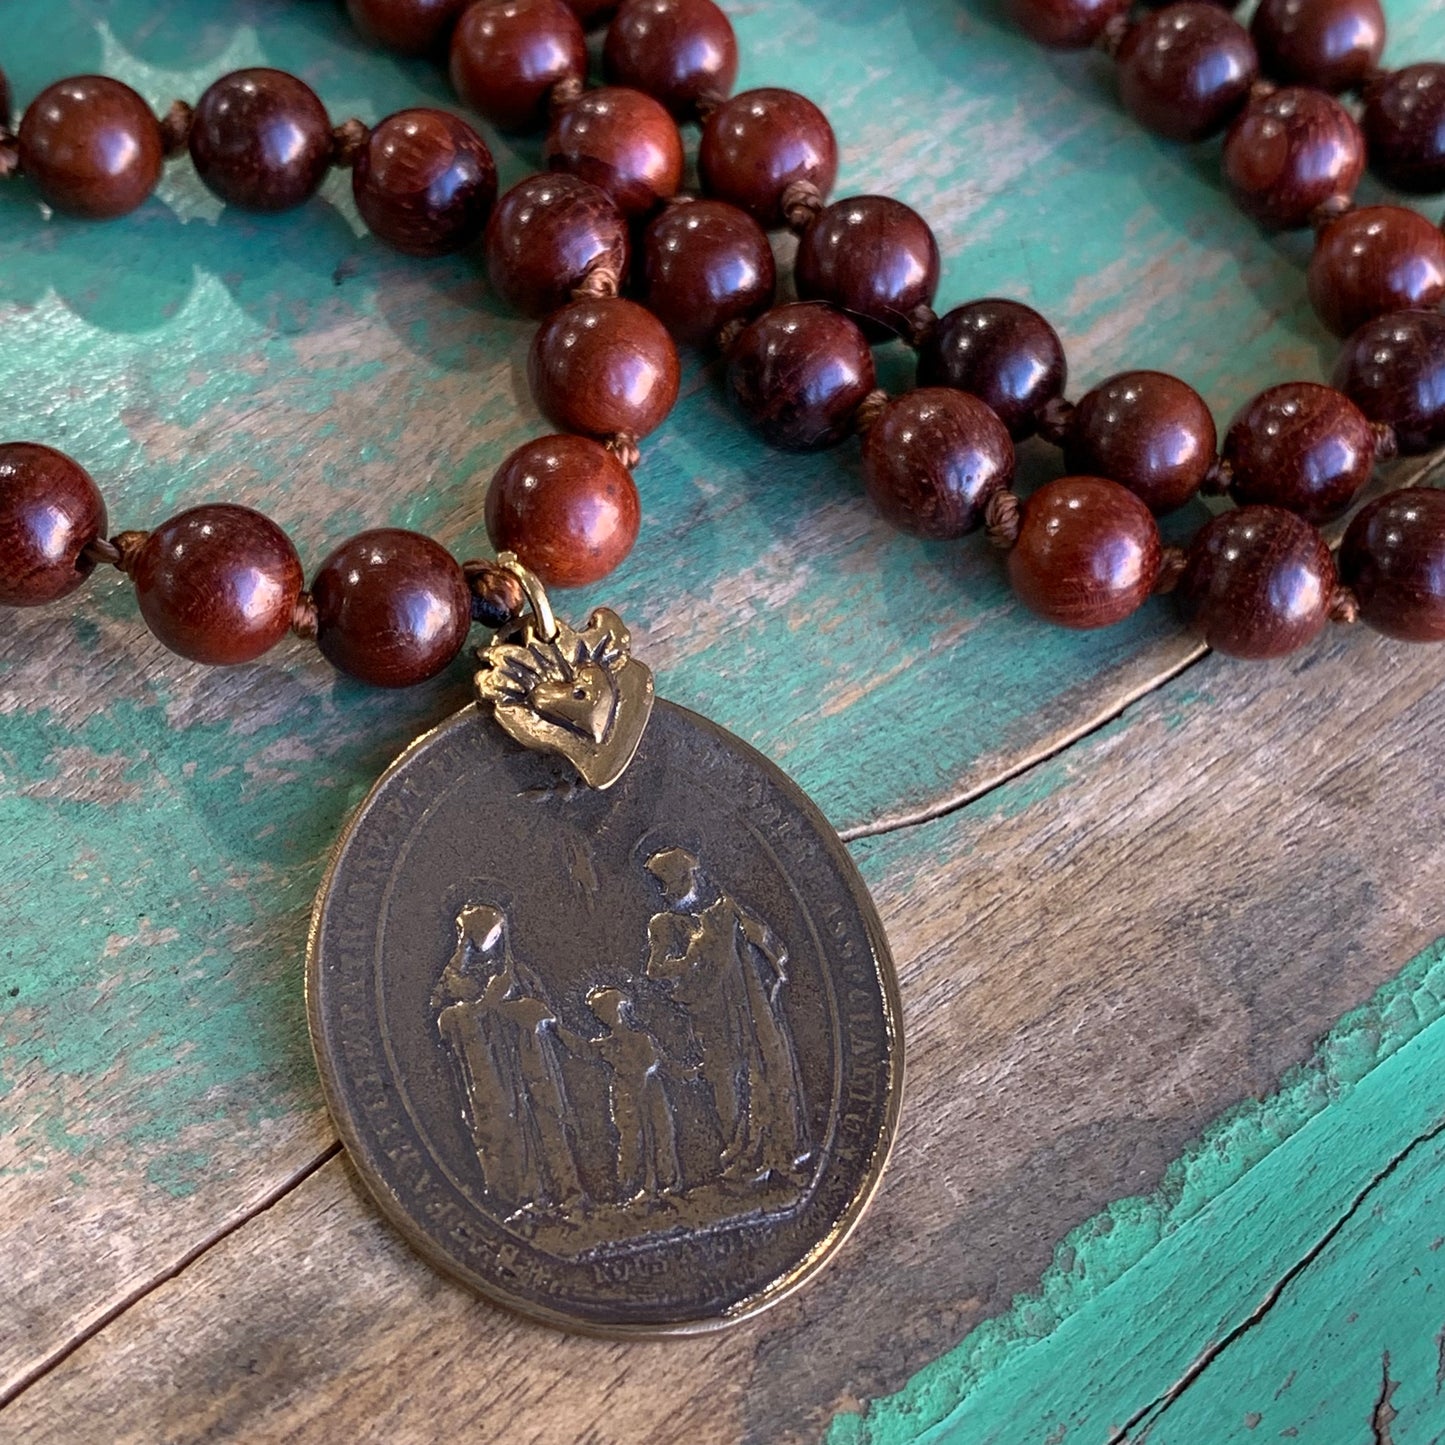 Holy Family Necklace